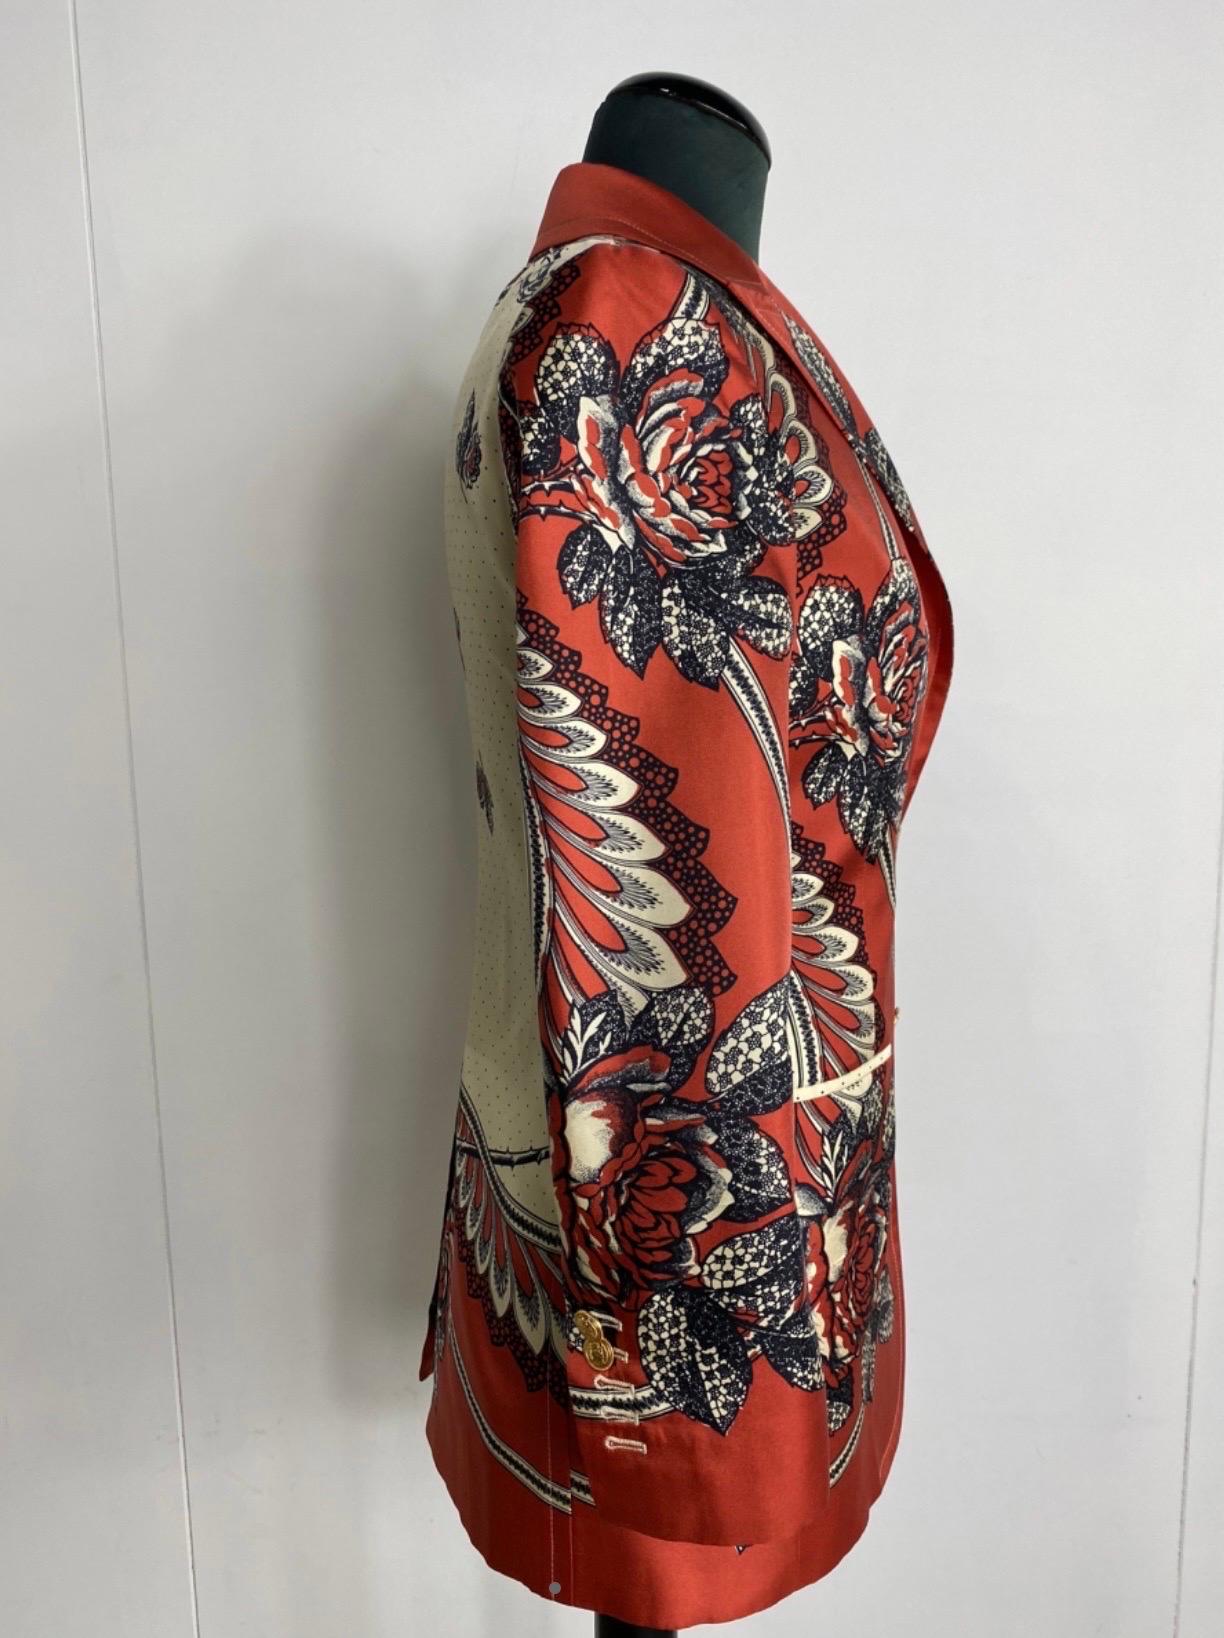 Gucci women's jacket.
in silk, red background color, with black and champagne-colored flowers printed, while the back has a champagne-colored background with black and red flowers and a central slit at the bottom, two pockets on the front of the